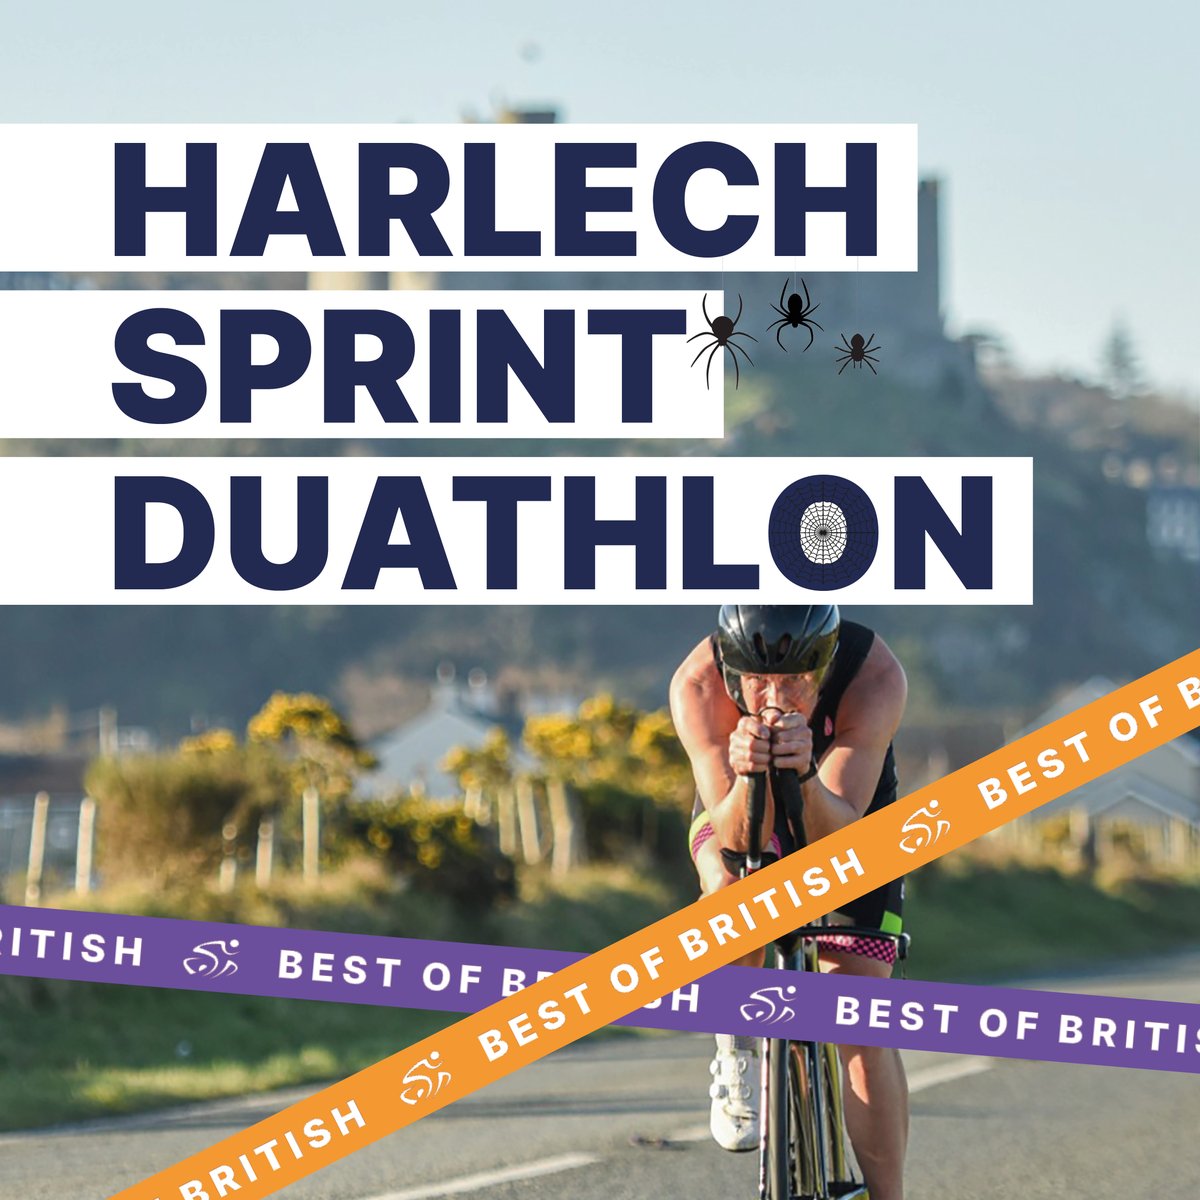 No tricks, just treats 🎃 The third stop on our #BestofBritish campaign: Harlech, Wales 🏴󠁧󠁢󠁷󠁬󠁳󠁿 Located in beautiful Snowdonia, Harlech delivers on its stunning natural beauty, and what better way to explore it than the Harlech Sprint Duathlon? Enter now ➡️ brnw.ch/21wE1FC